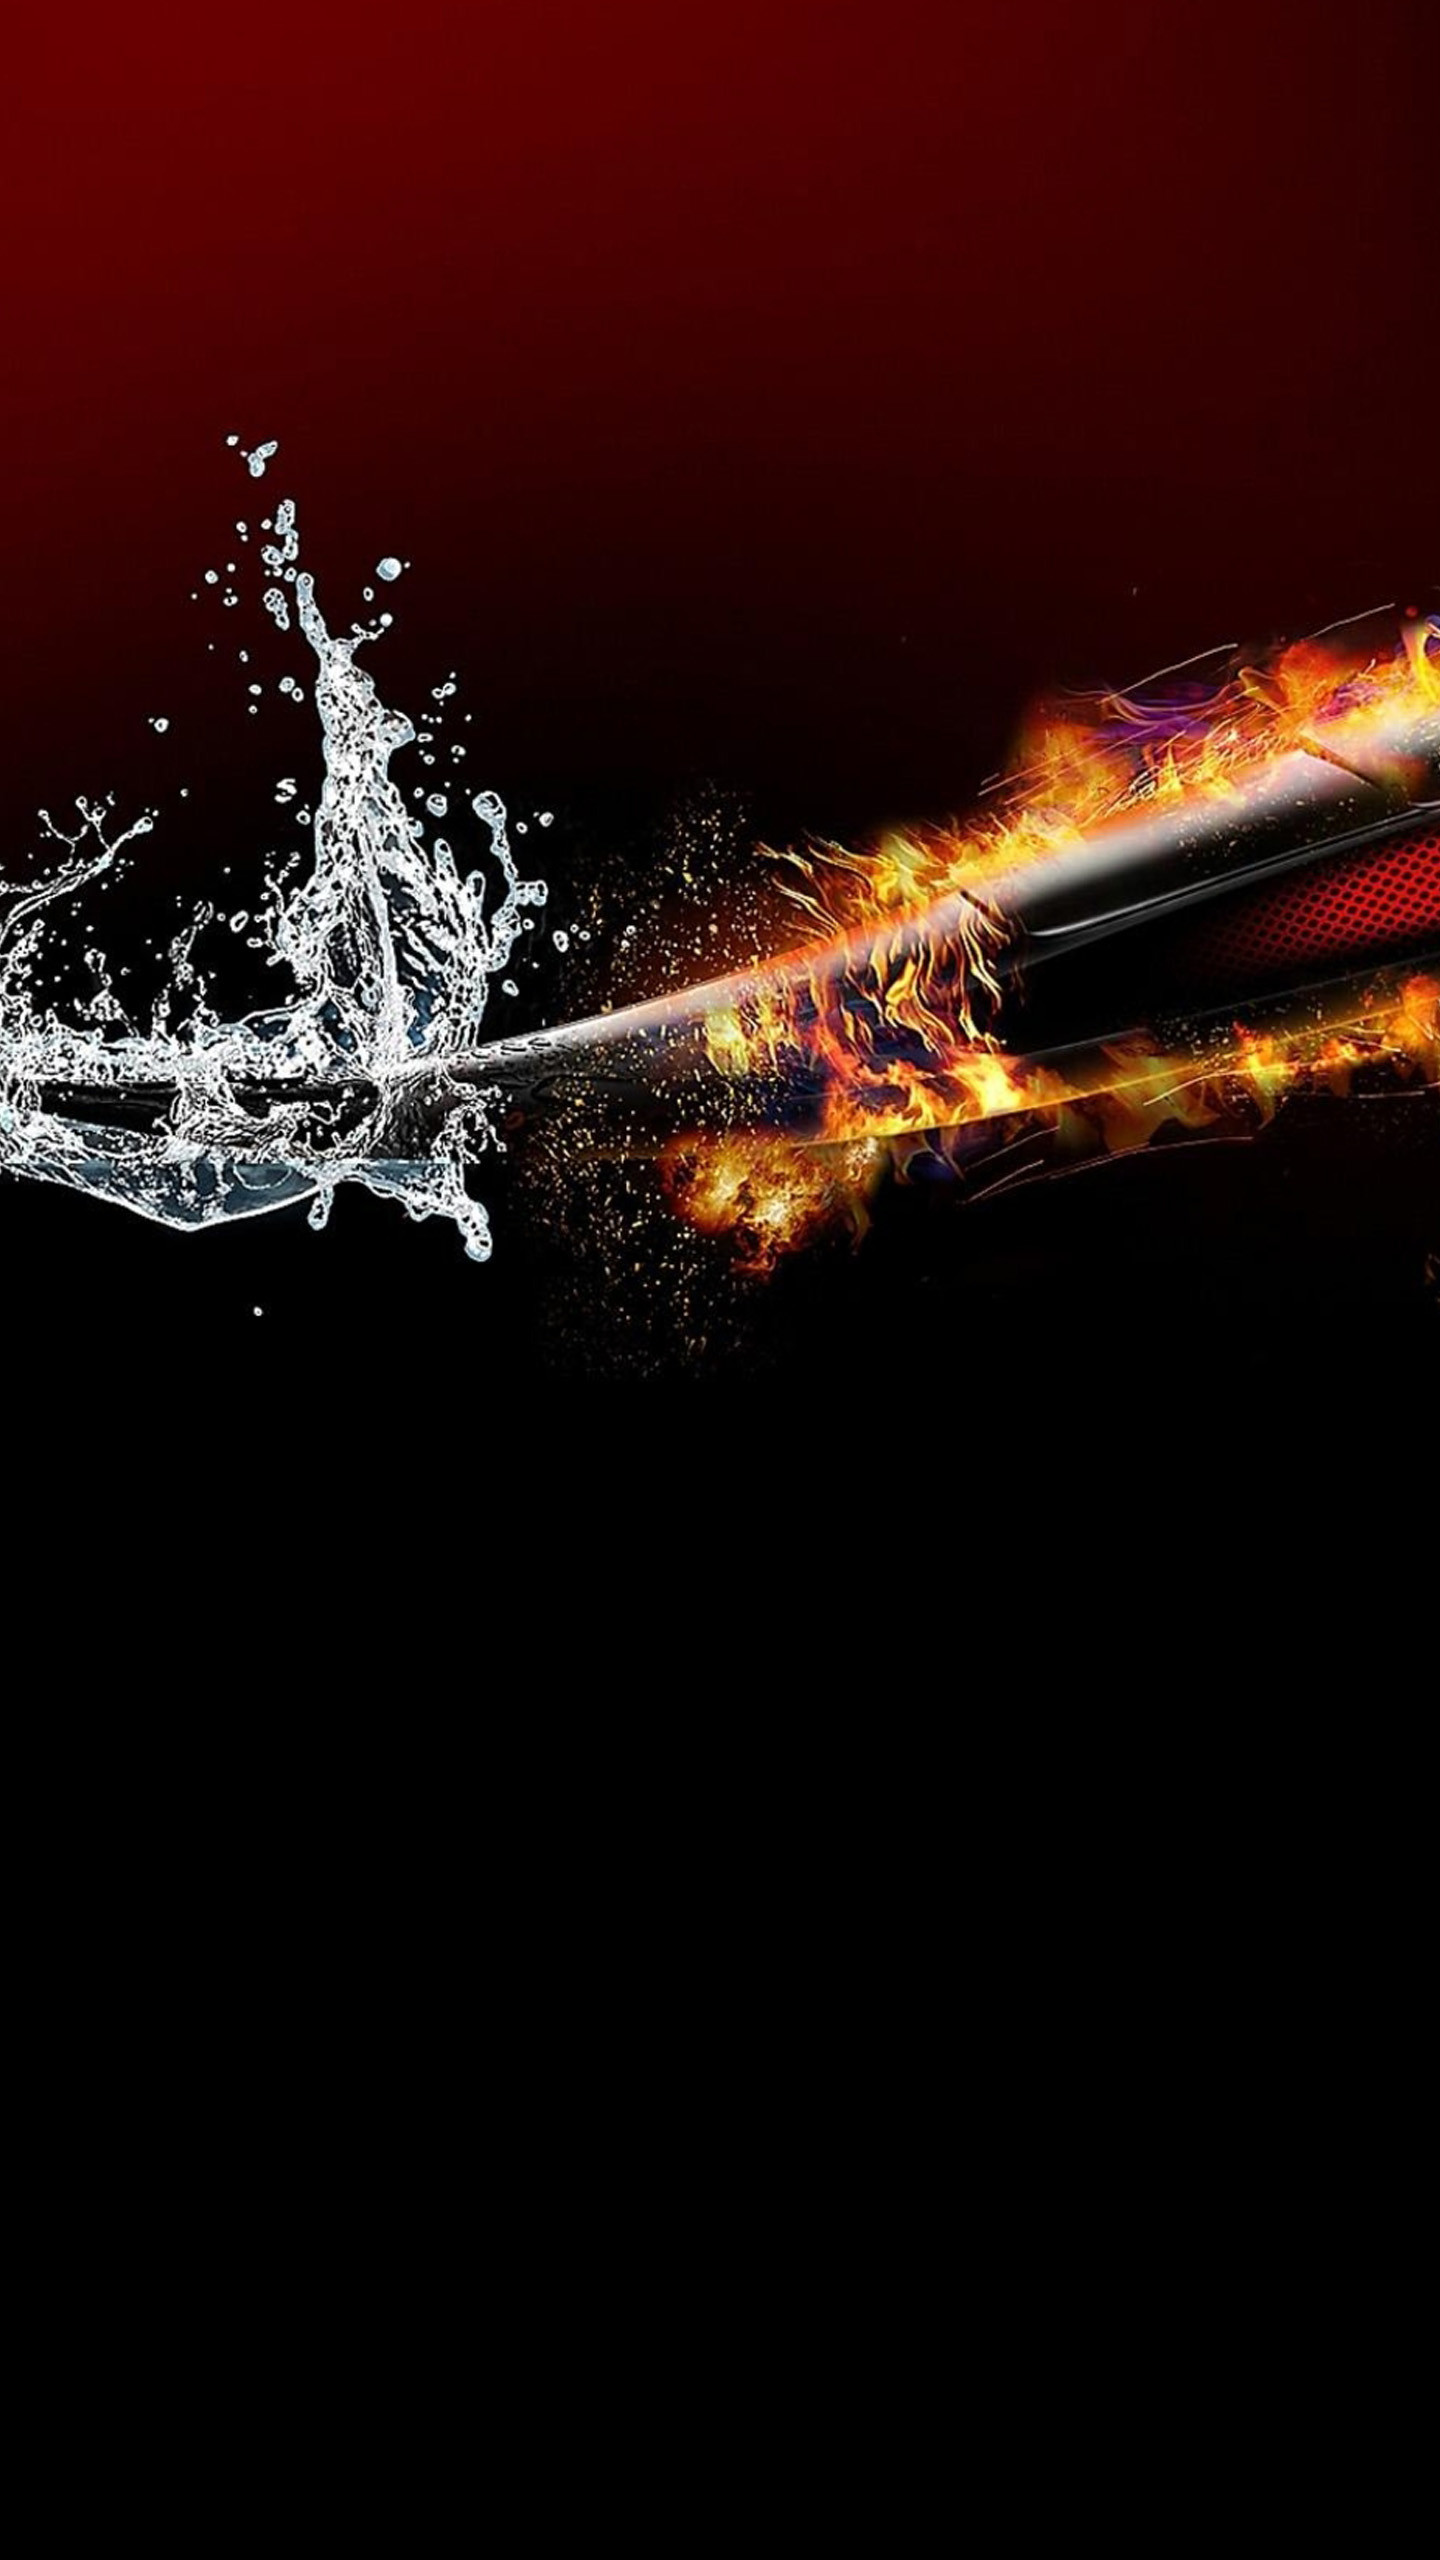 1440x2560 ... wallpaper-samsung-galaxy-s6-water-and-fire-awesome ...